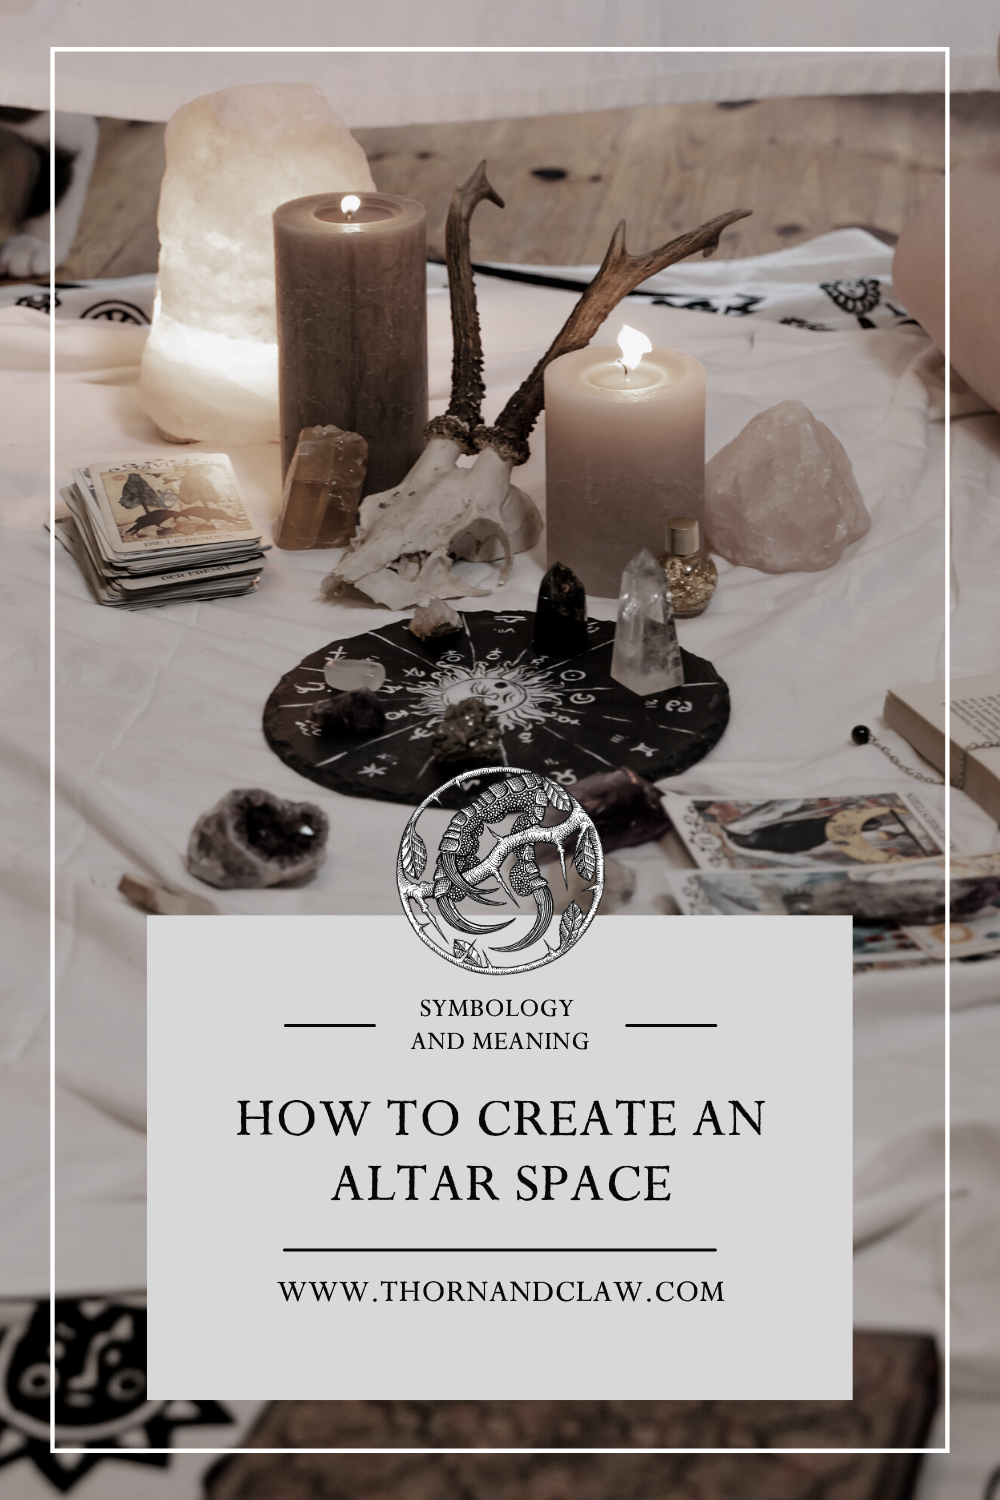 How to create an altar space at home